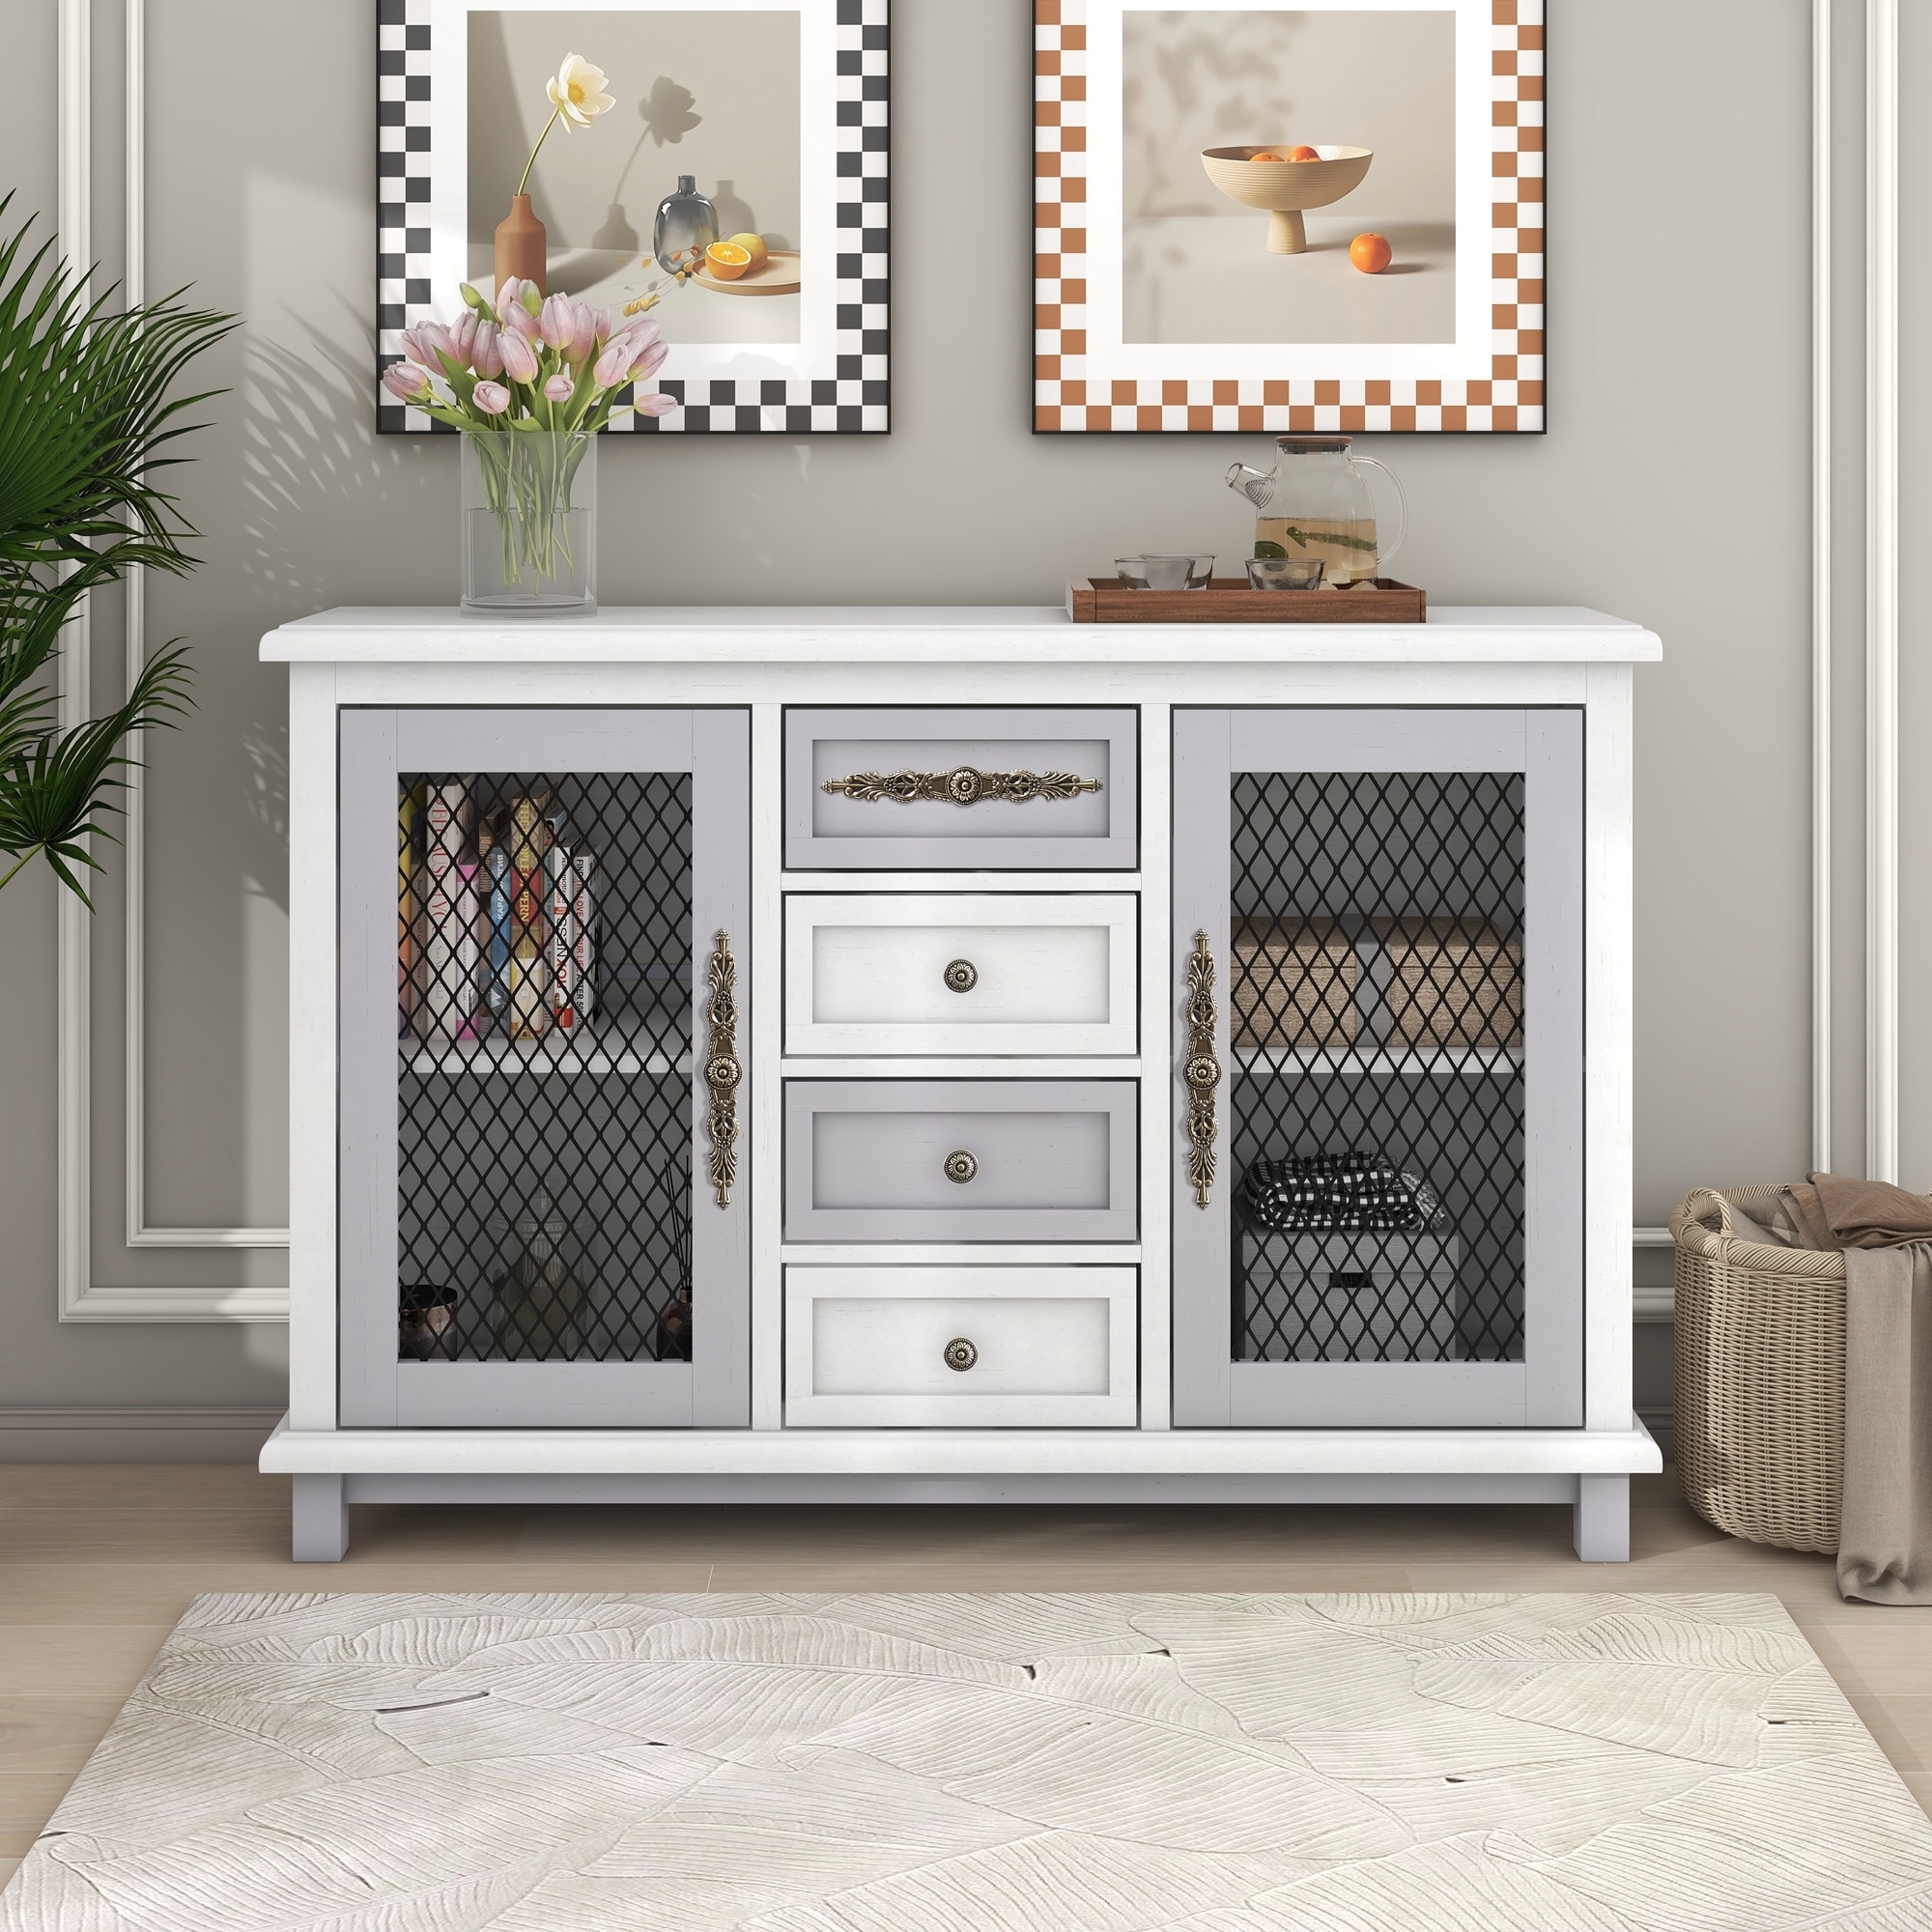 Nestfair Retro Style Console Table Cabinet with 4 Drawers and 2 Iron Mesh Doors